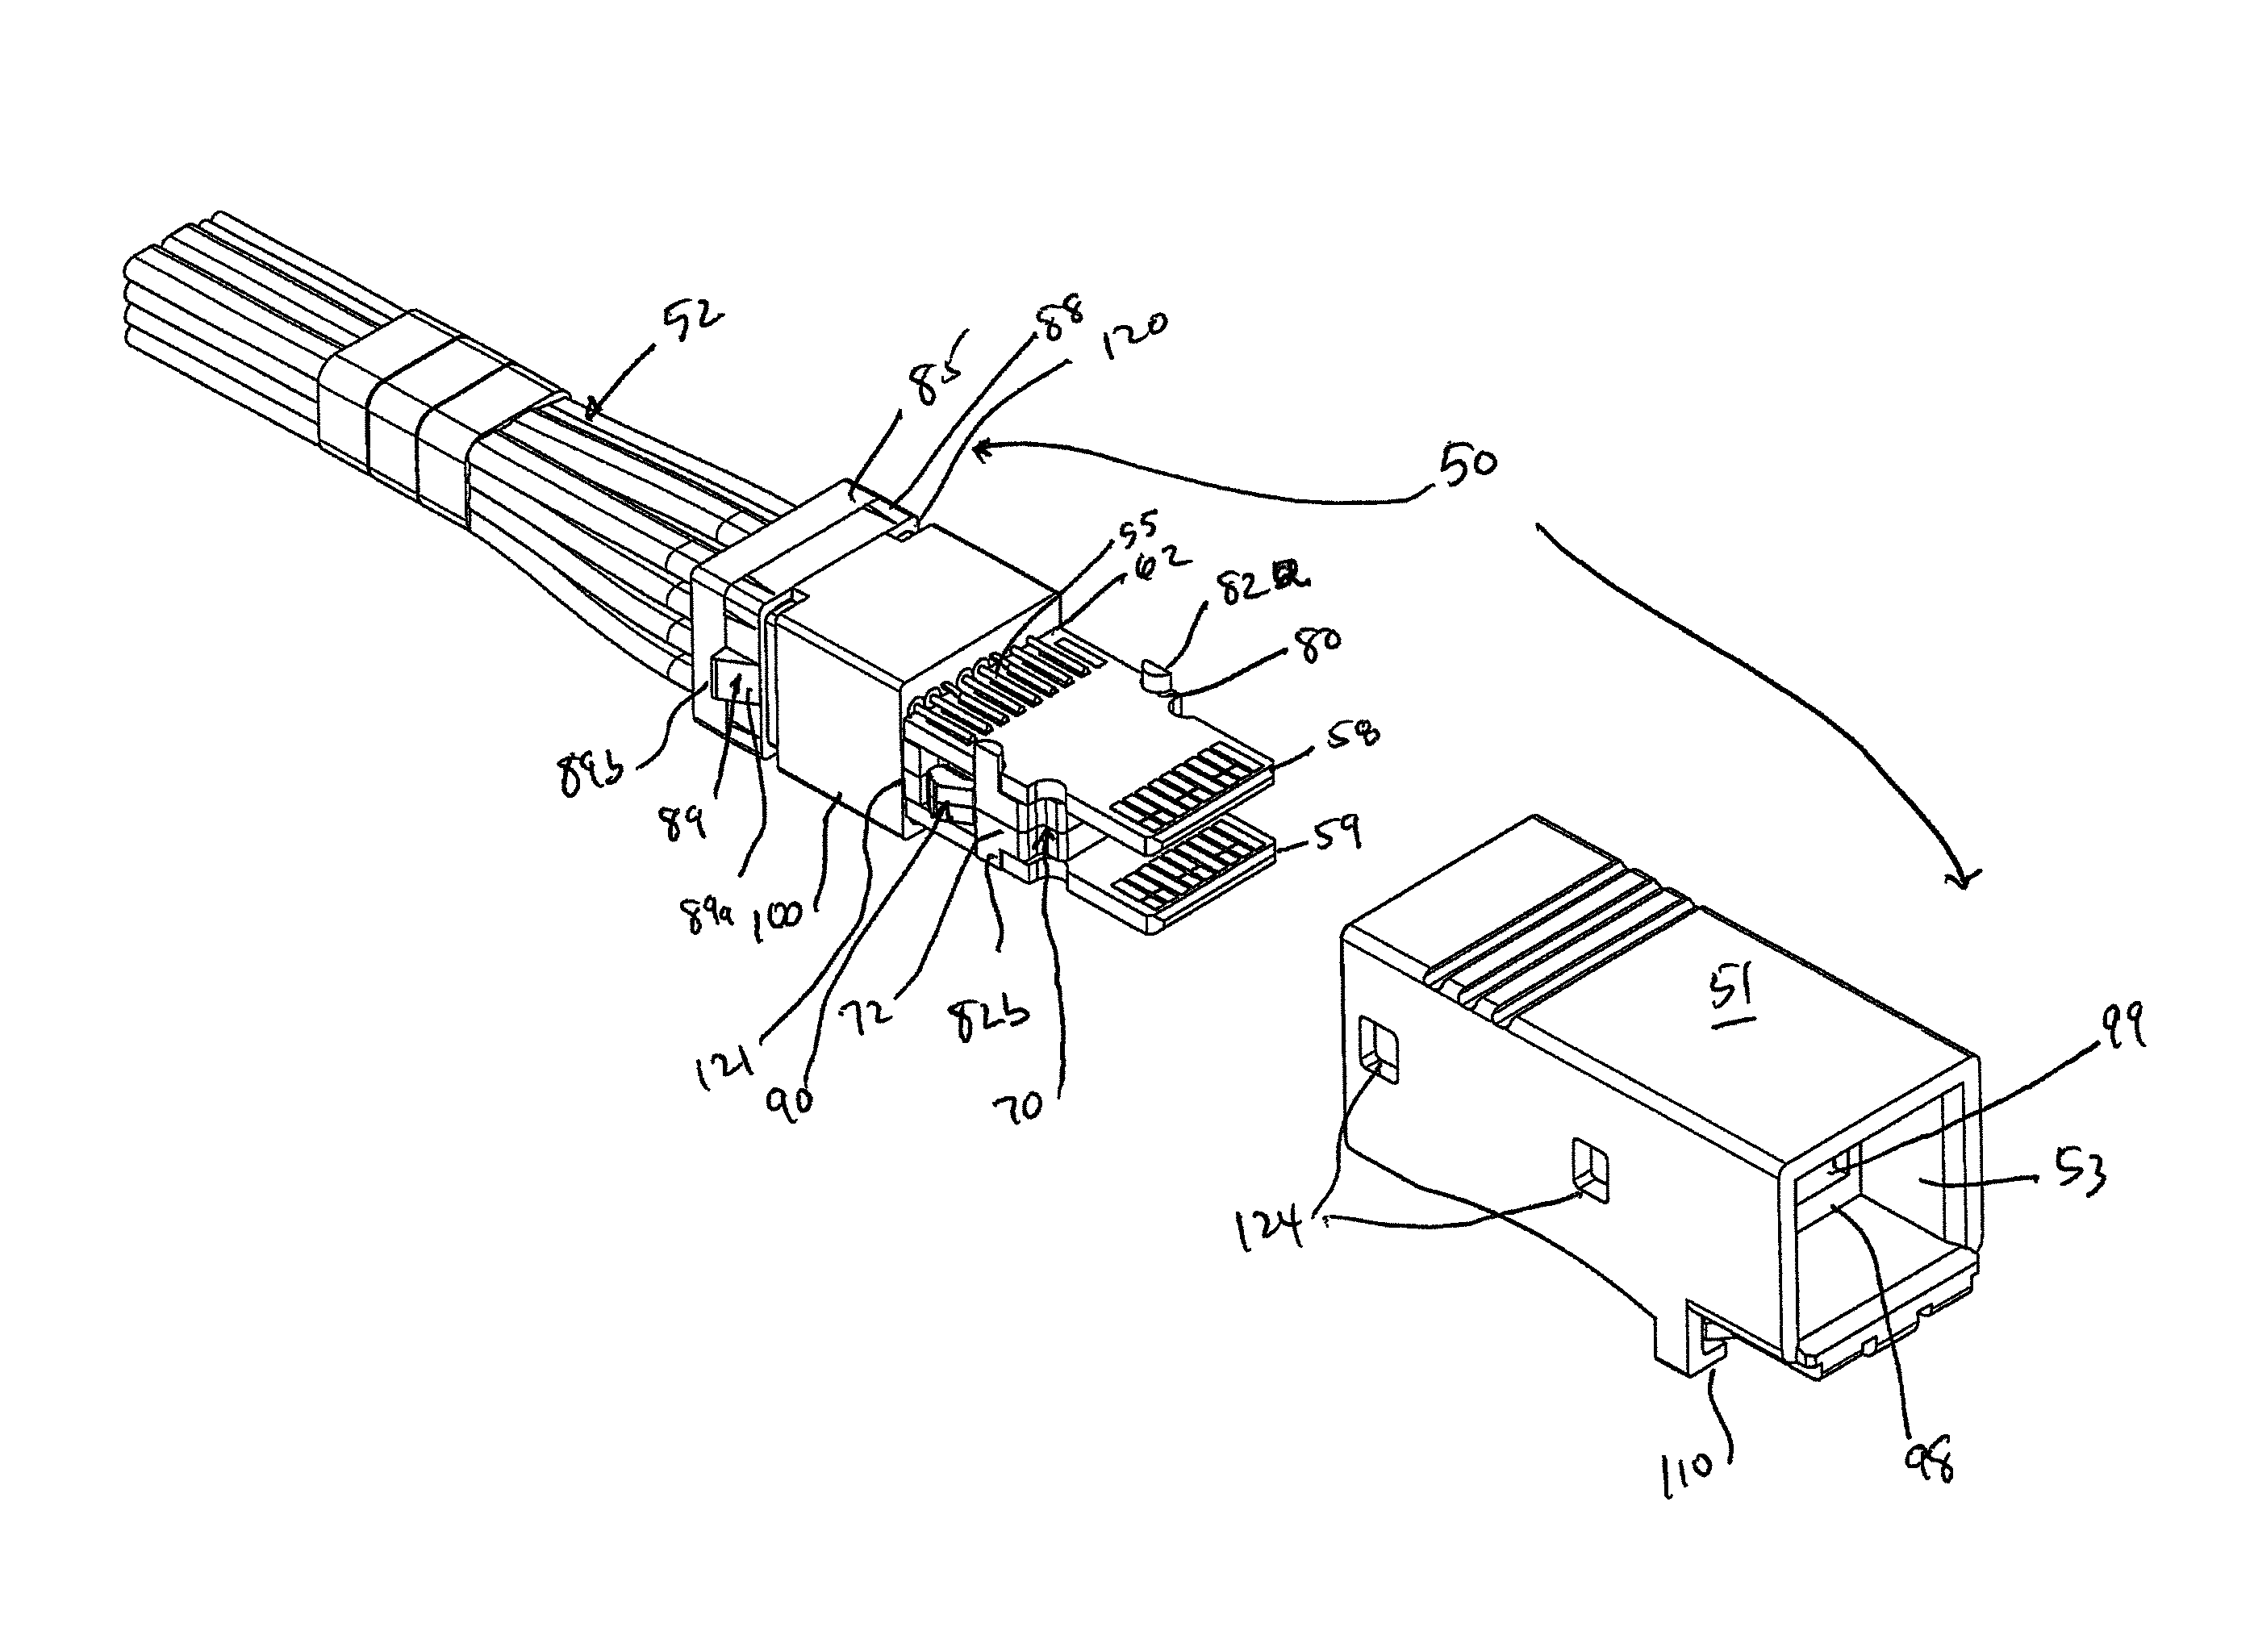 Plug connector with improved construction